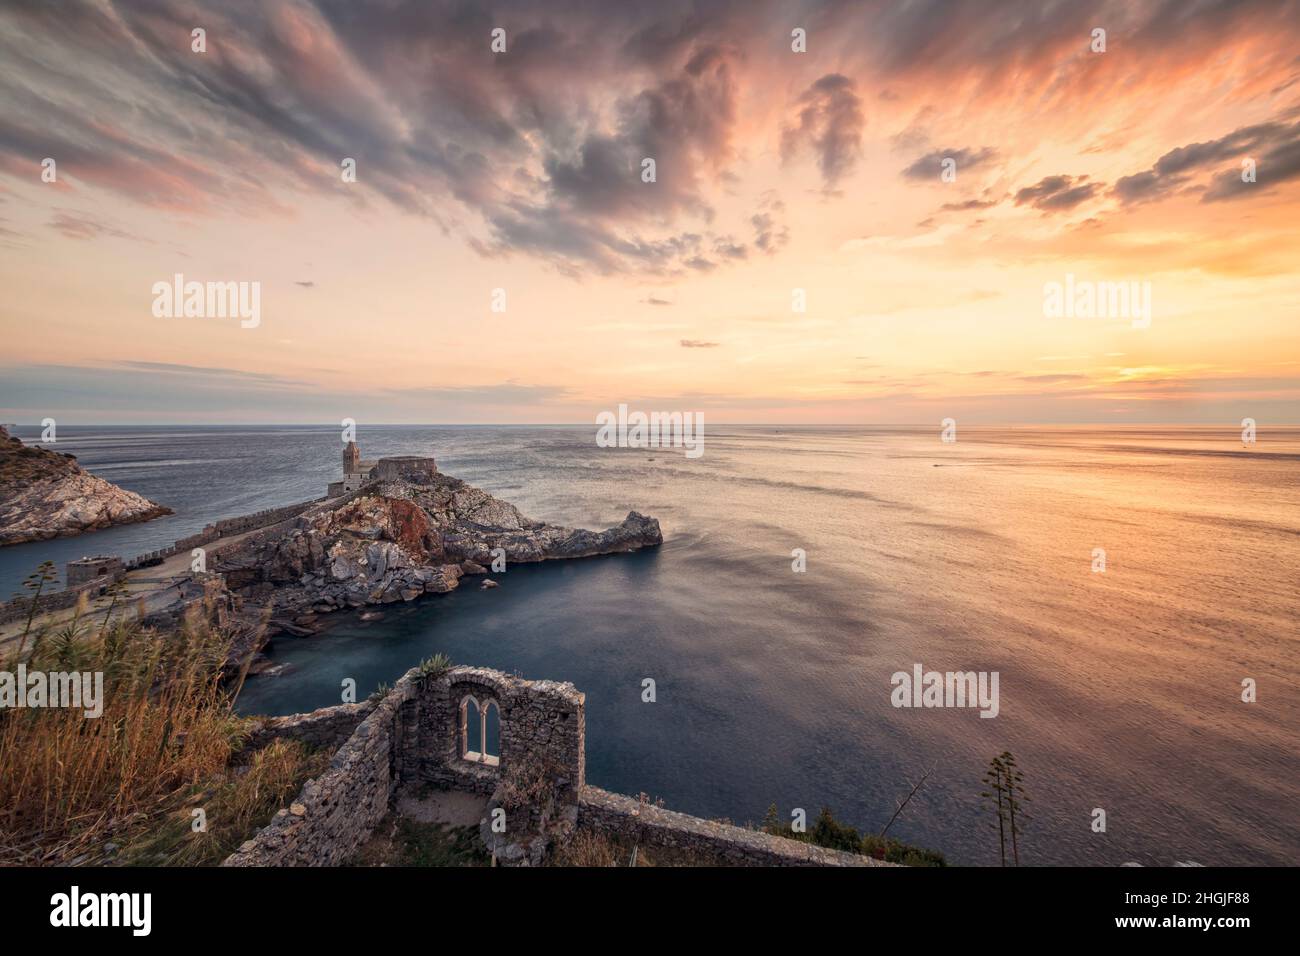 Wonderful sunset full of colors in Porto Venere - Italy in front of the church overlooking the sea Stock Photo